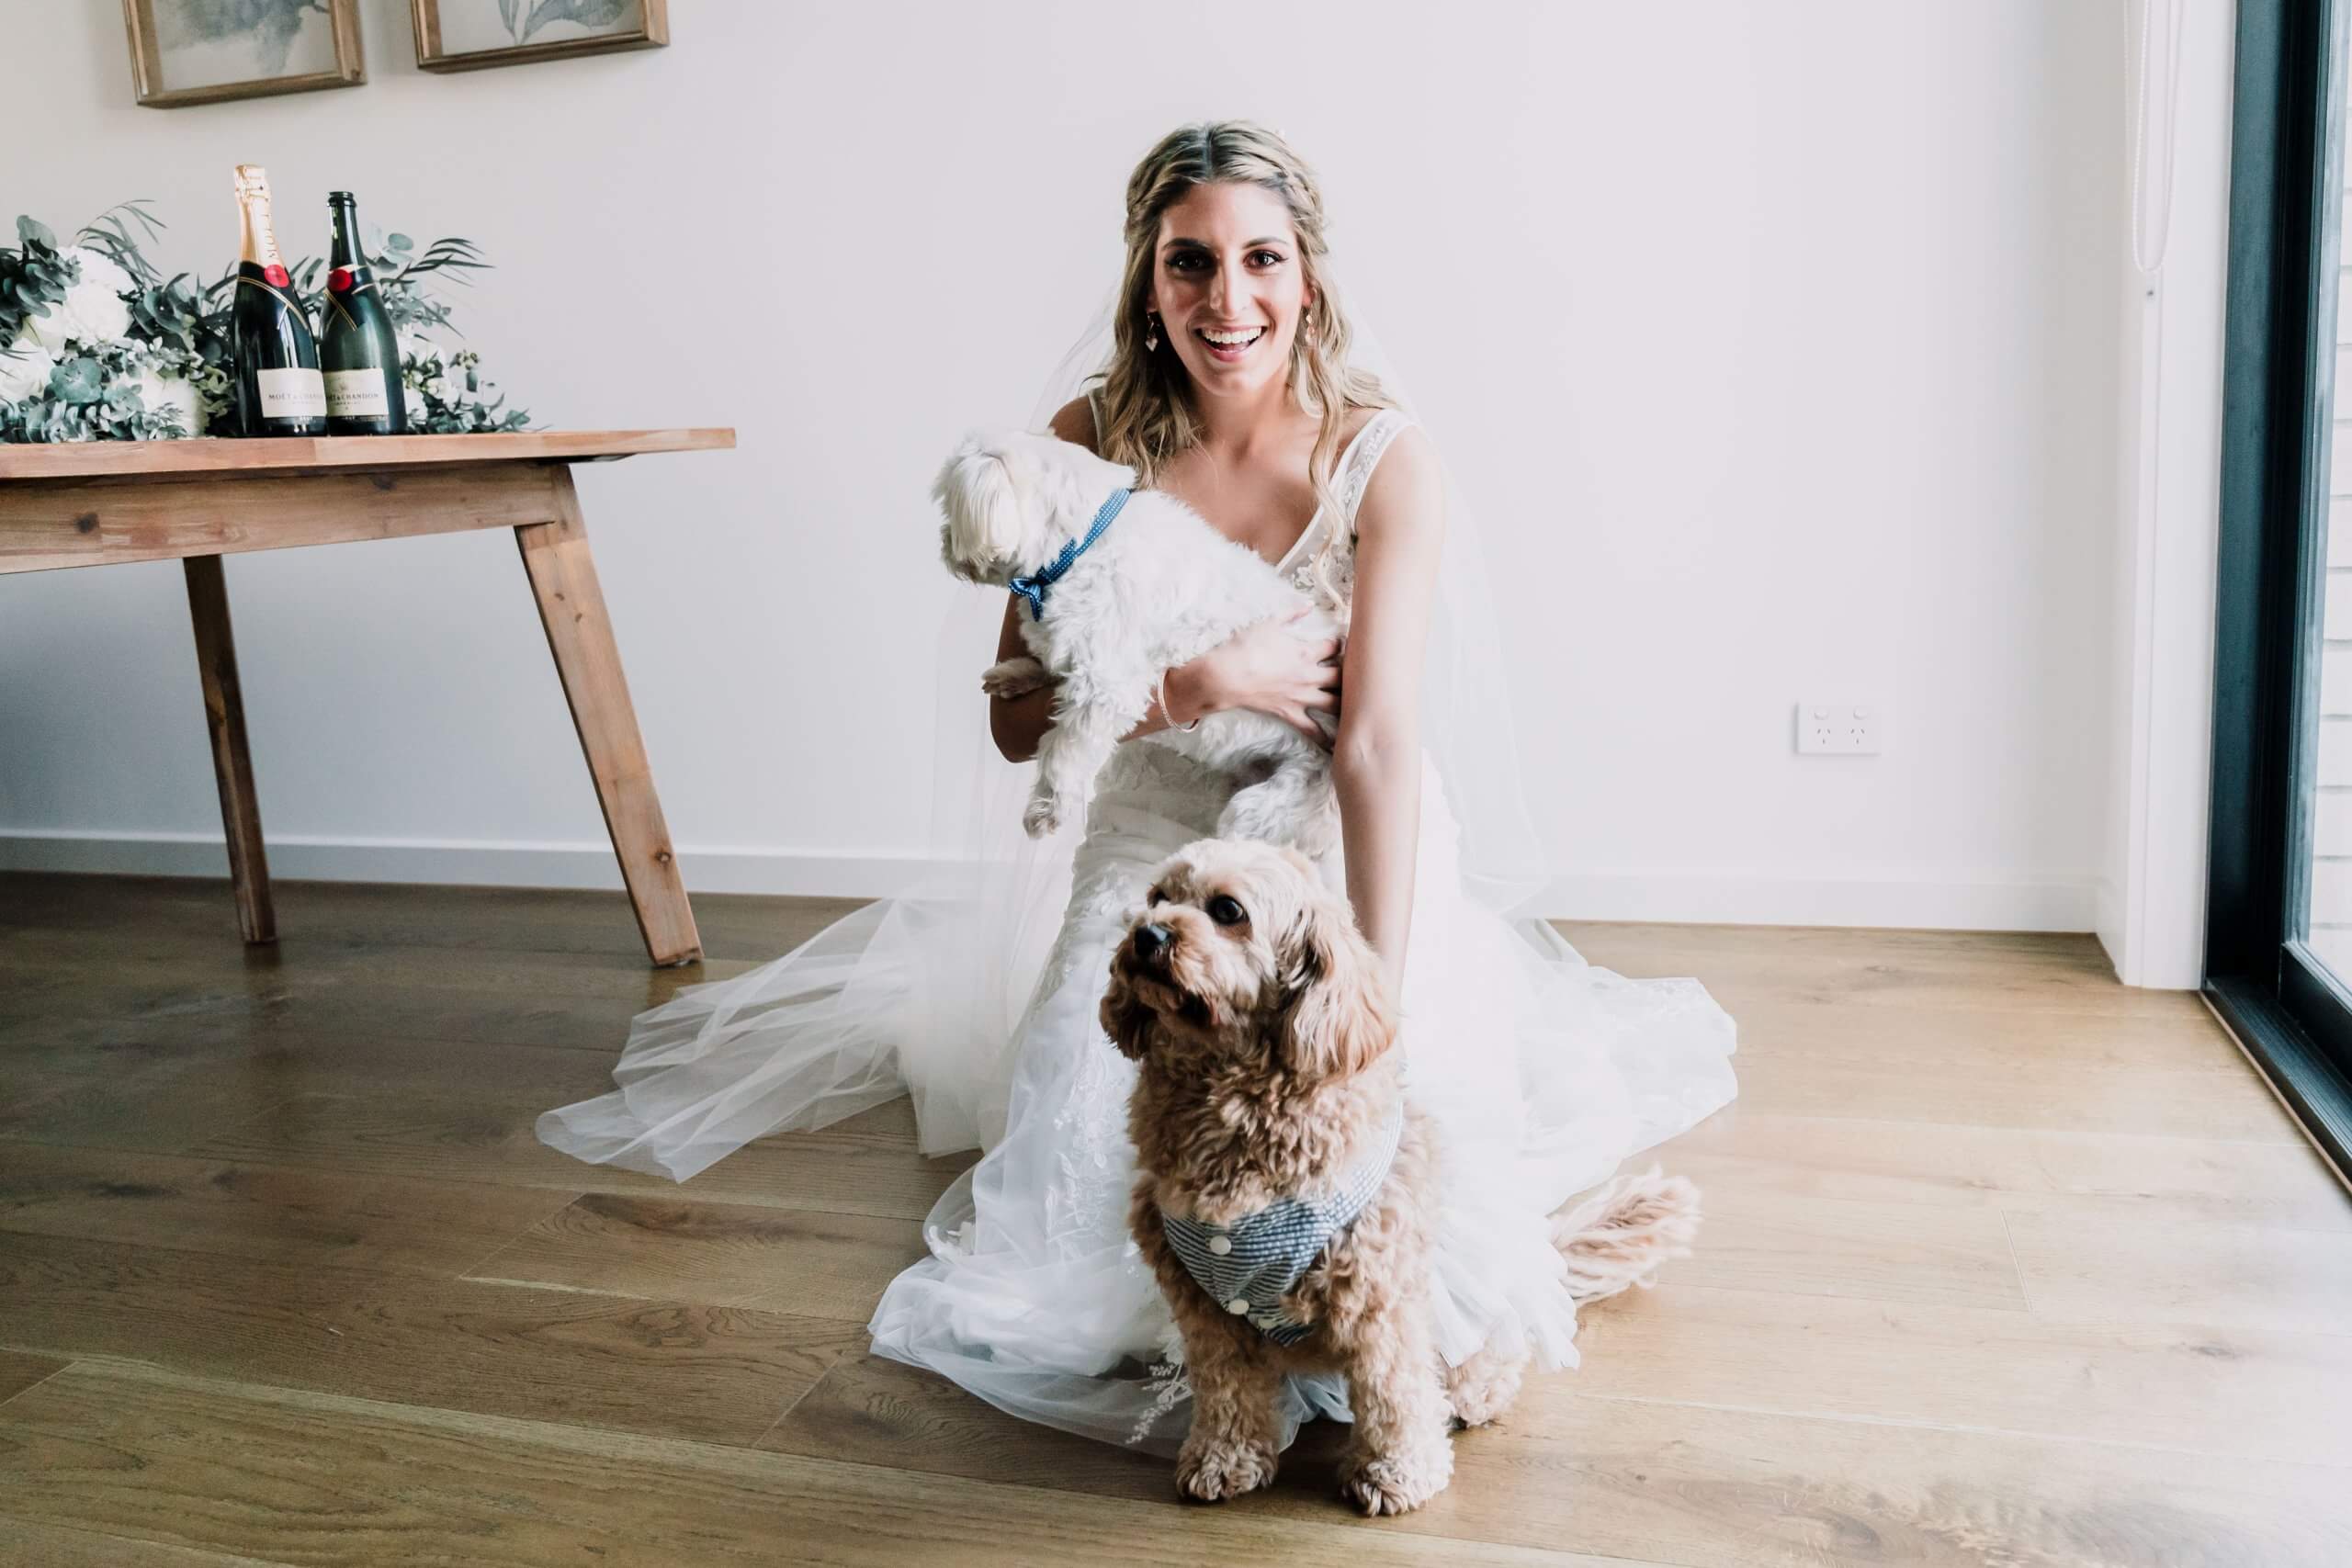 Bride in her wedding dress, kneeling on the floor to carry and pet her two dogs.